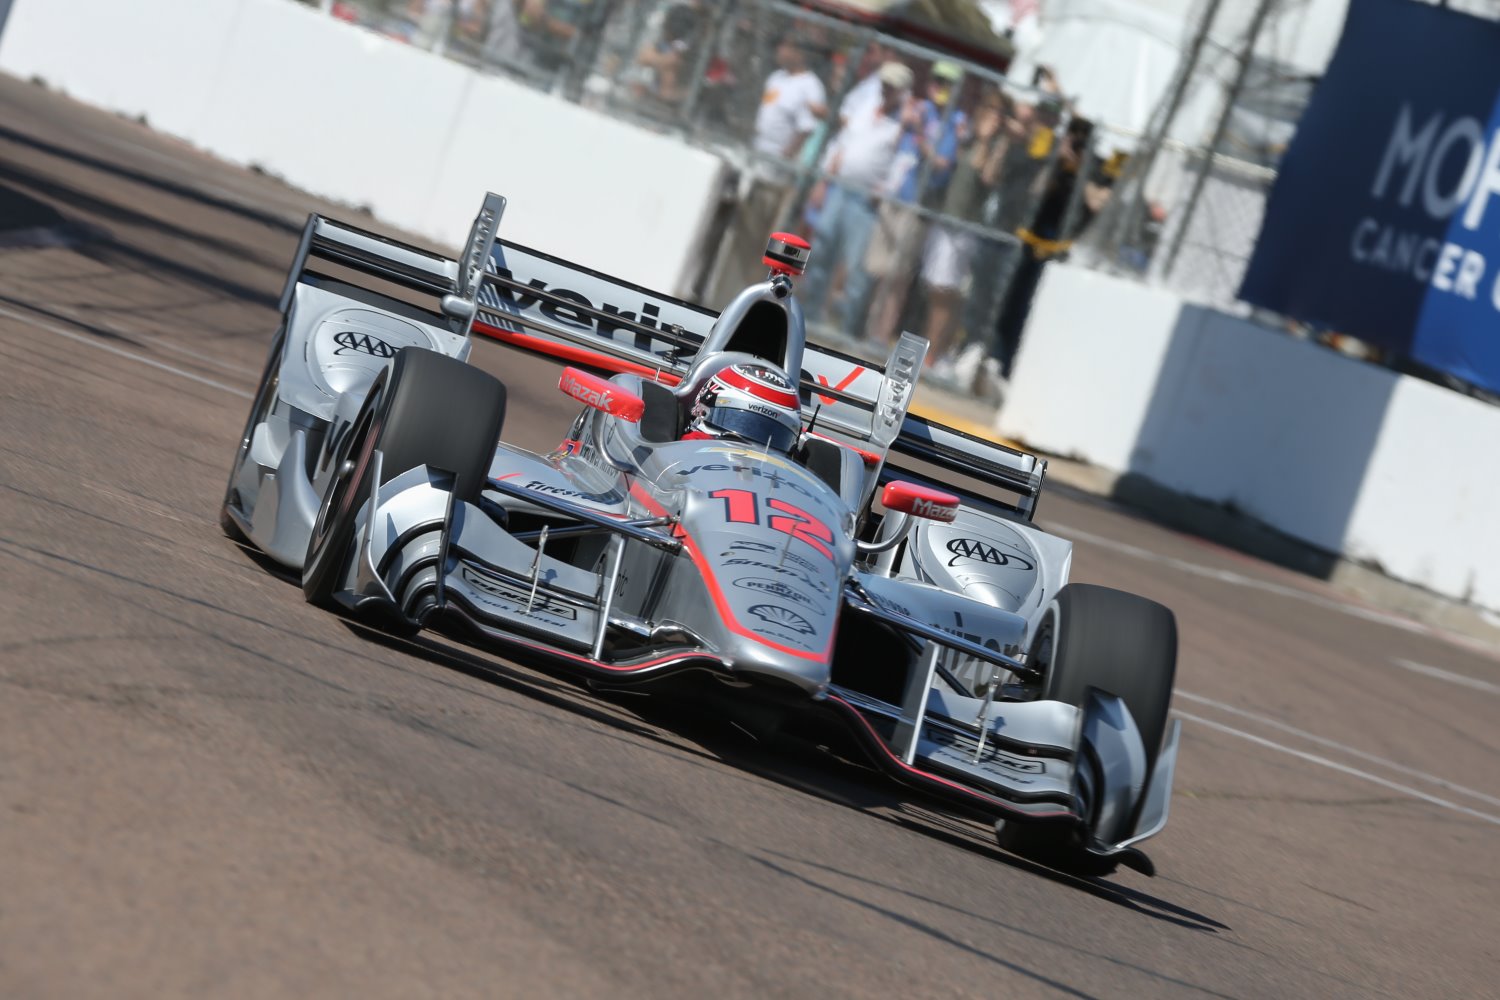 Will Power charges to pole